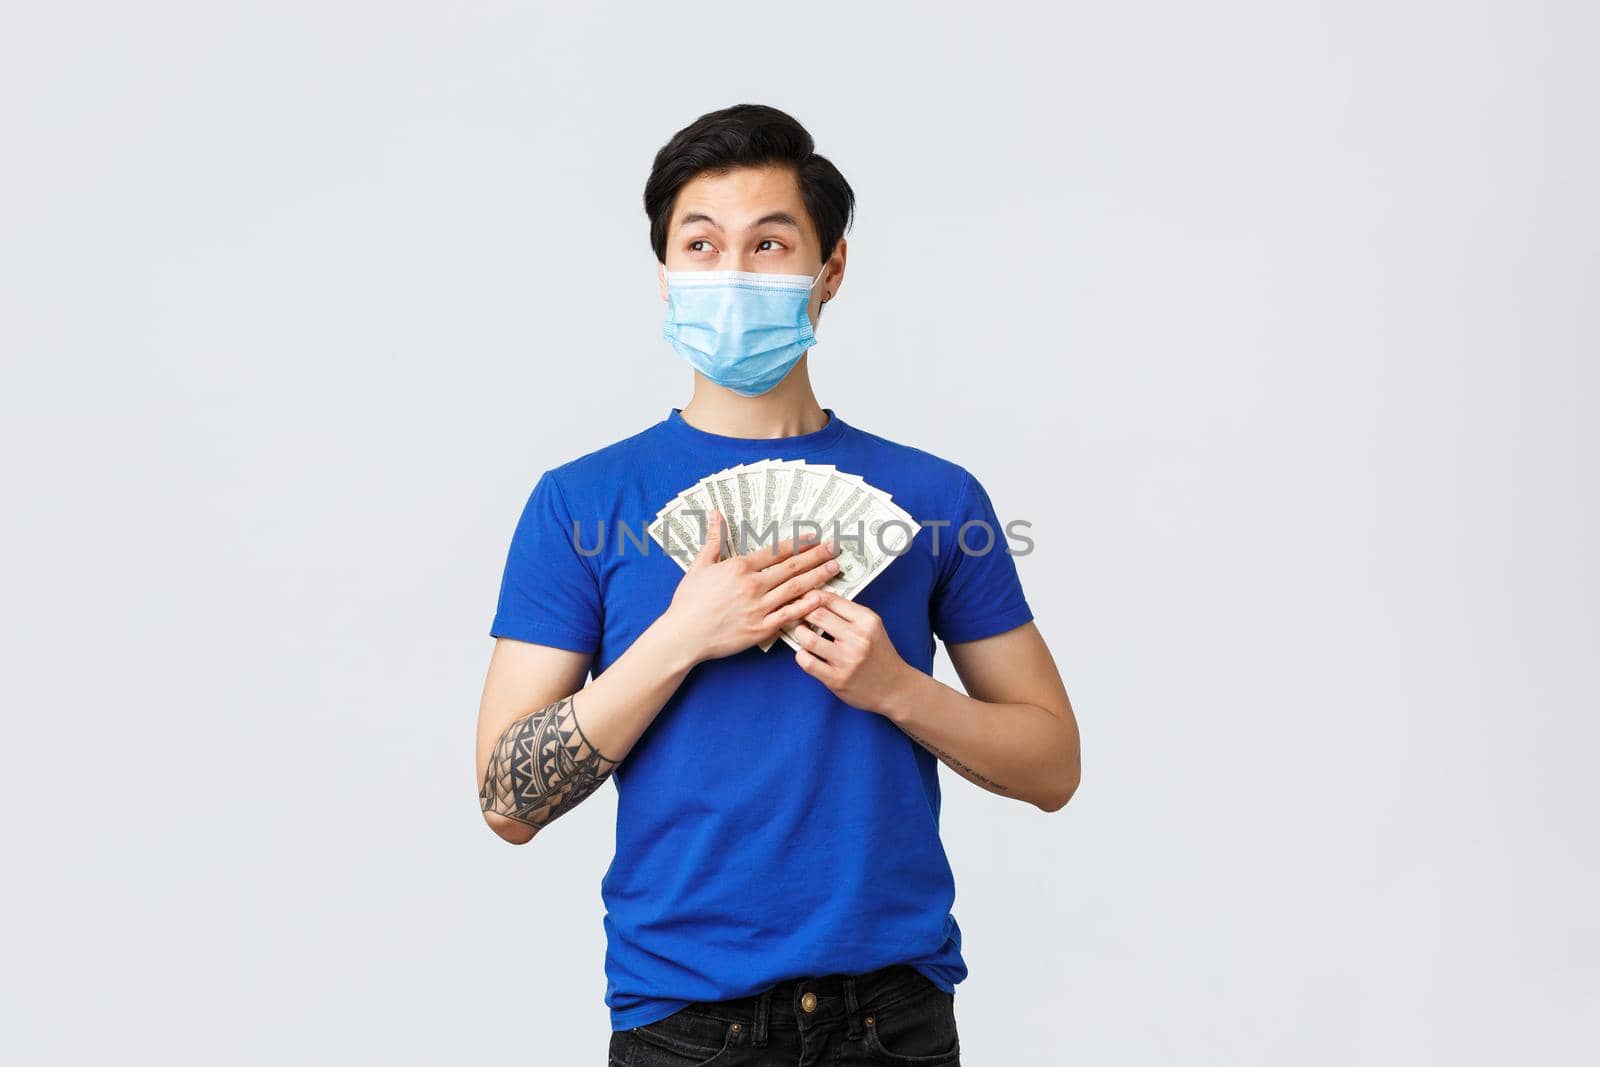 Money, lifestyle, insurance and investment concept. Dreamy happy asian man holding cash and thinking what buy on it, looking away smiling, wear medical mask, grey background.